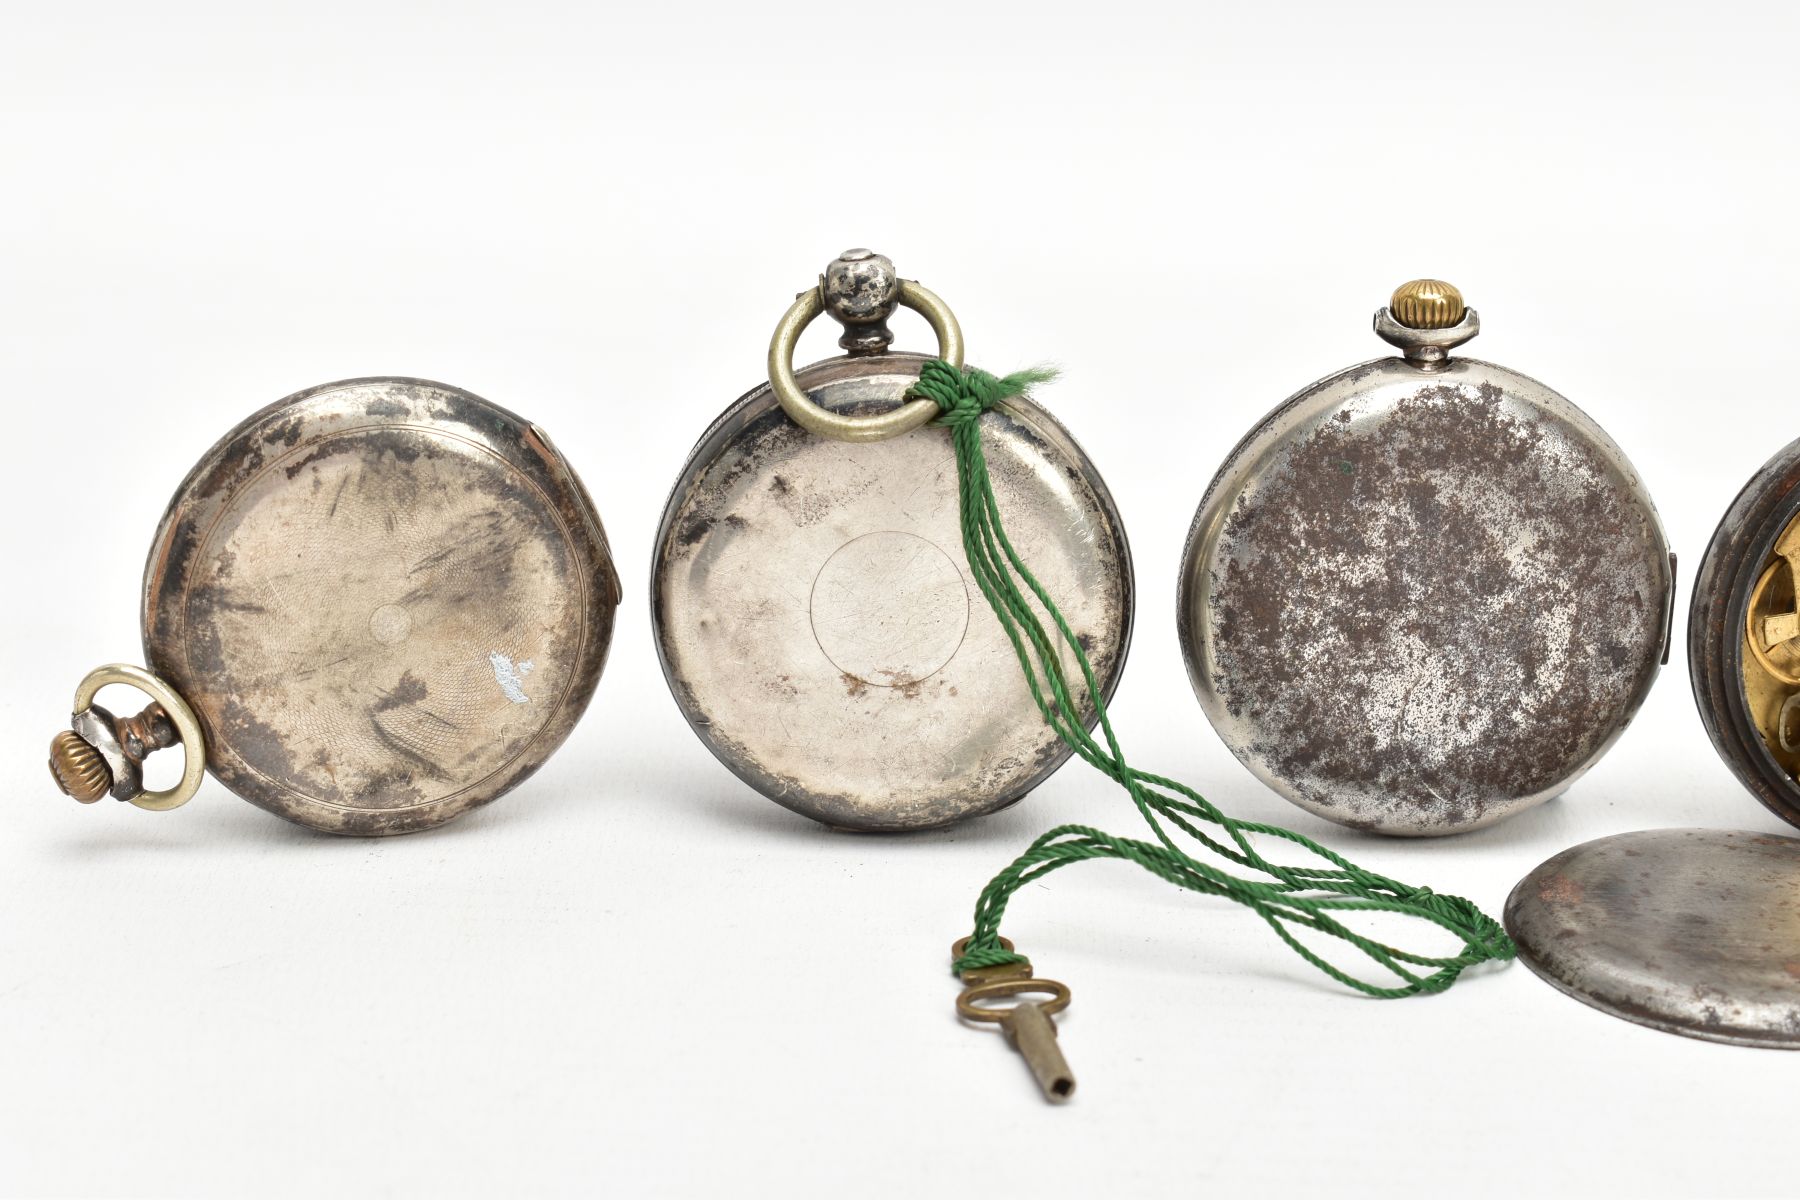 SIX POCKET WATCHES, to include five open face examples and one full hunter, one in a case, including - Image 5 of 8